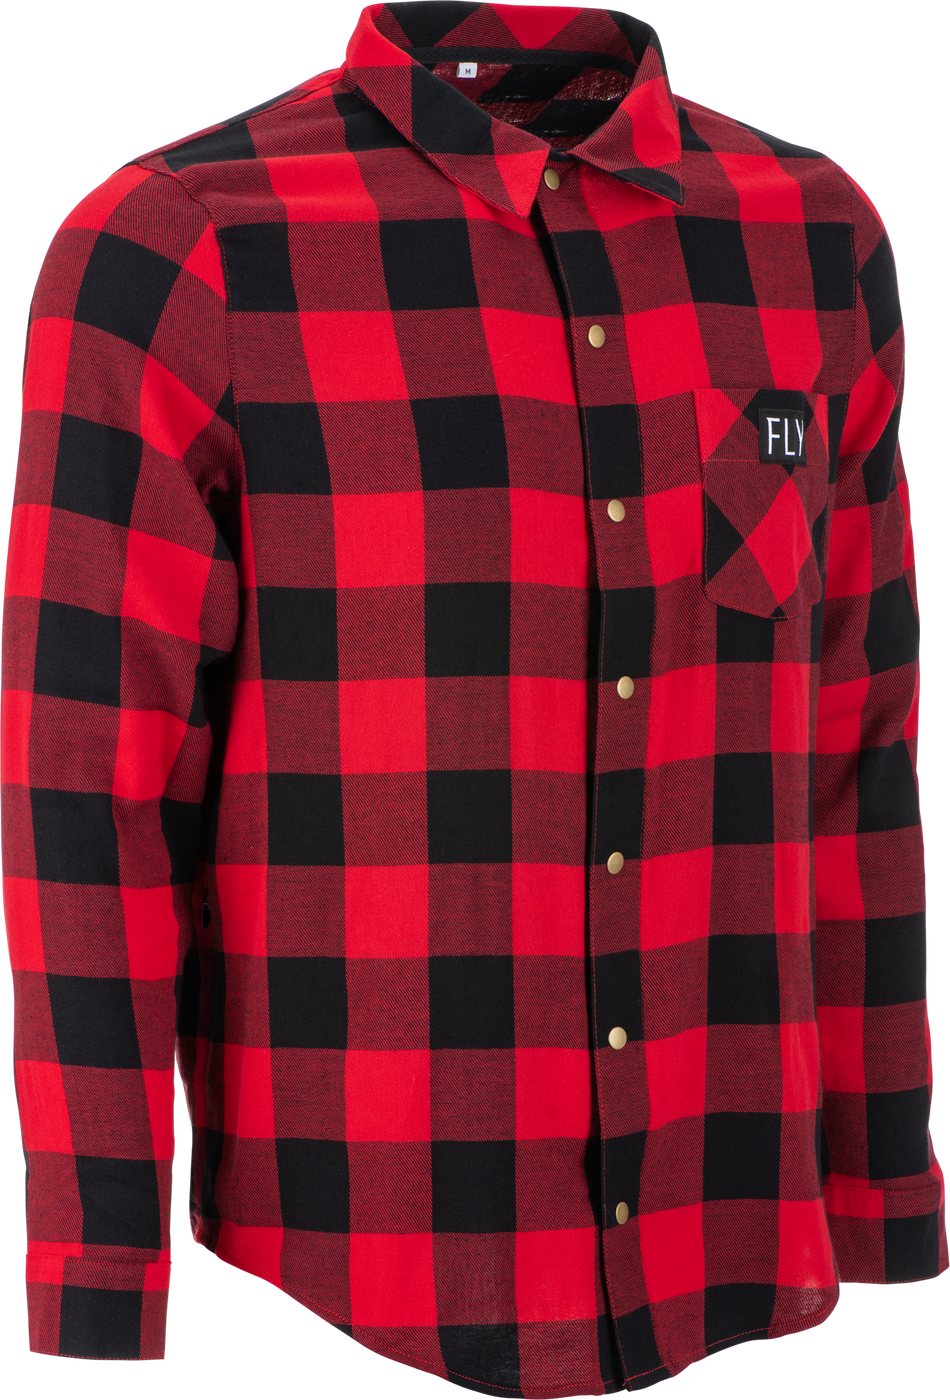 FLY RACING Fly Tek Flannel Red/Black Md 354-6392M